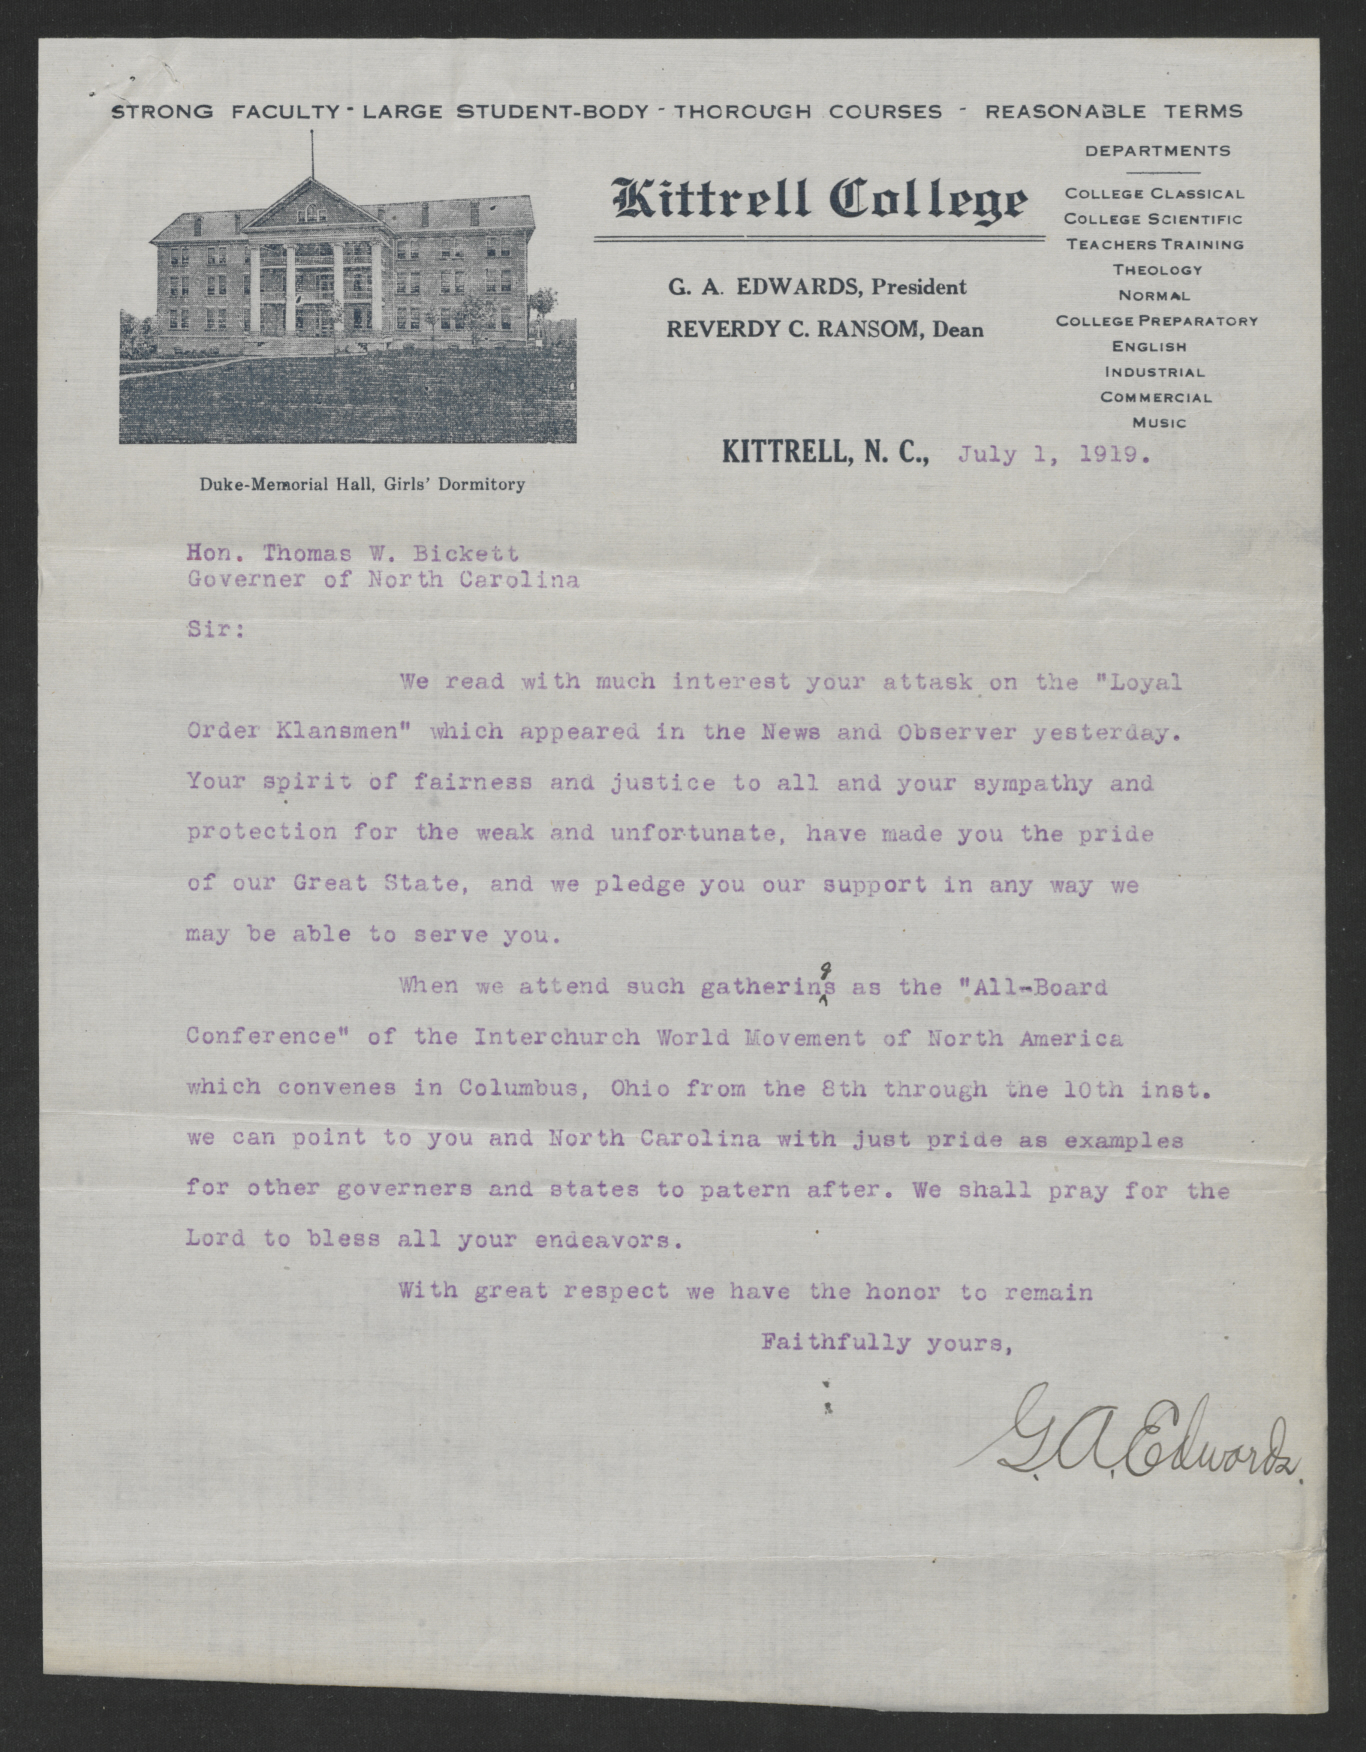 Letter from Gaston A. Edwards to Thomas W. Bickett, July 1, 1919